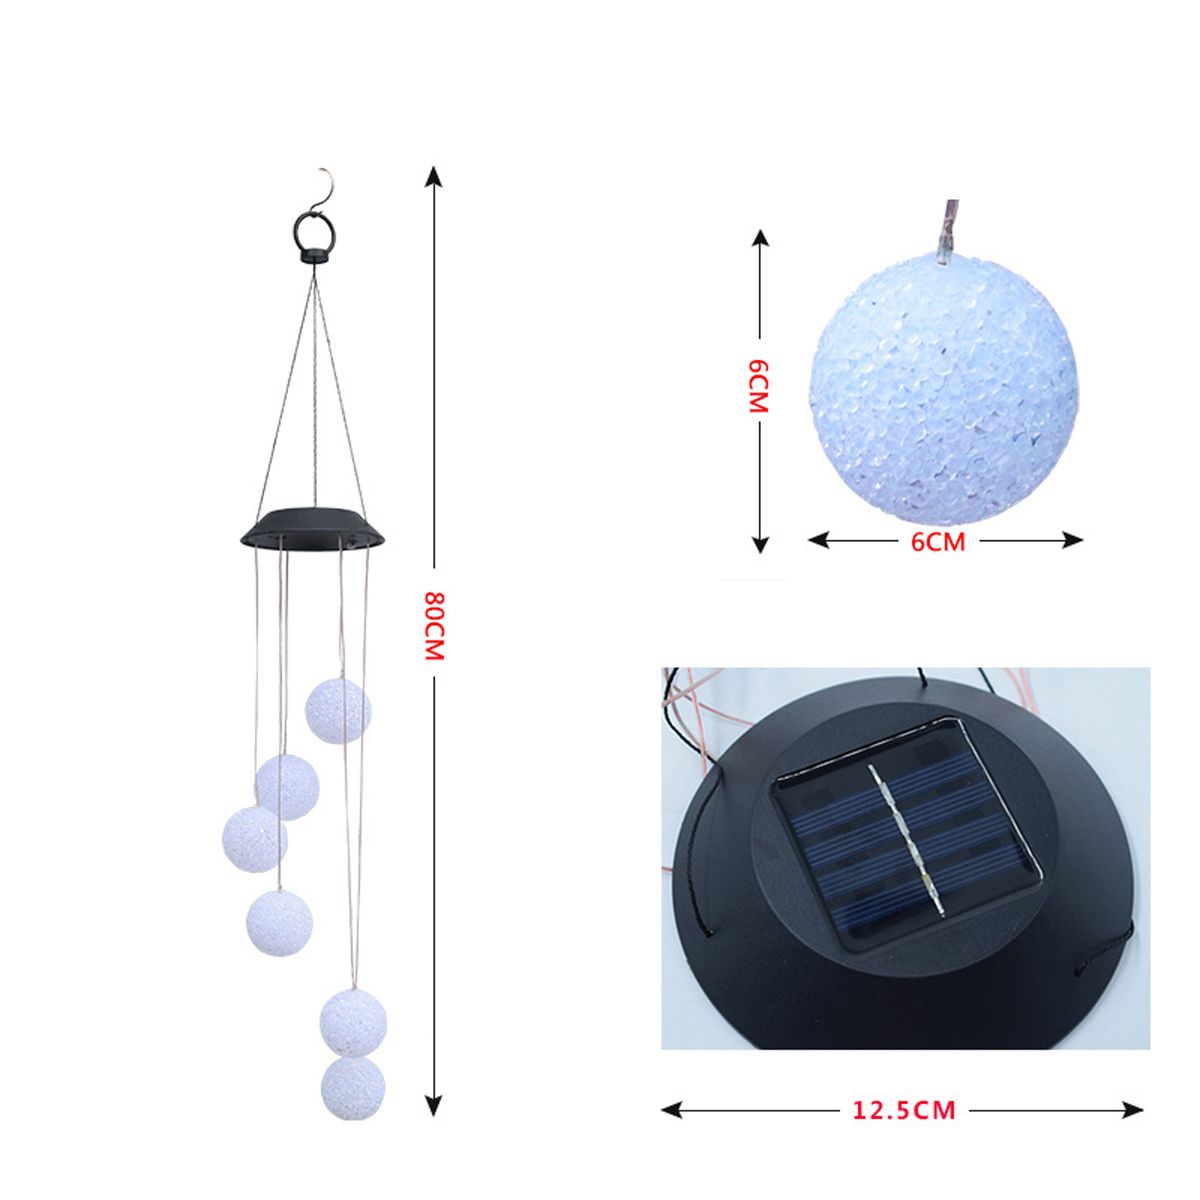 Aeolian-Hanging-Wind-Solar-LED-Lights-Chimes-Powered-String-Lawn-Garden-Lamp-1642749